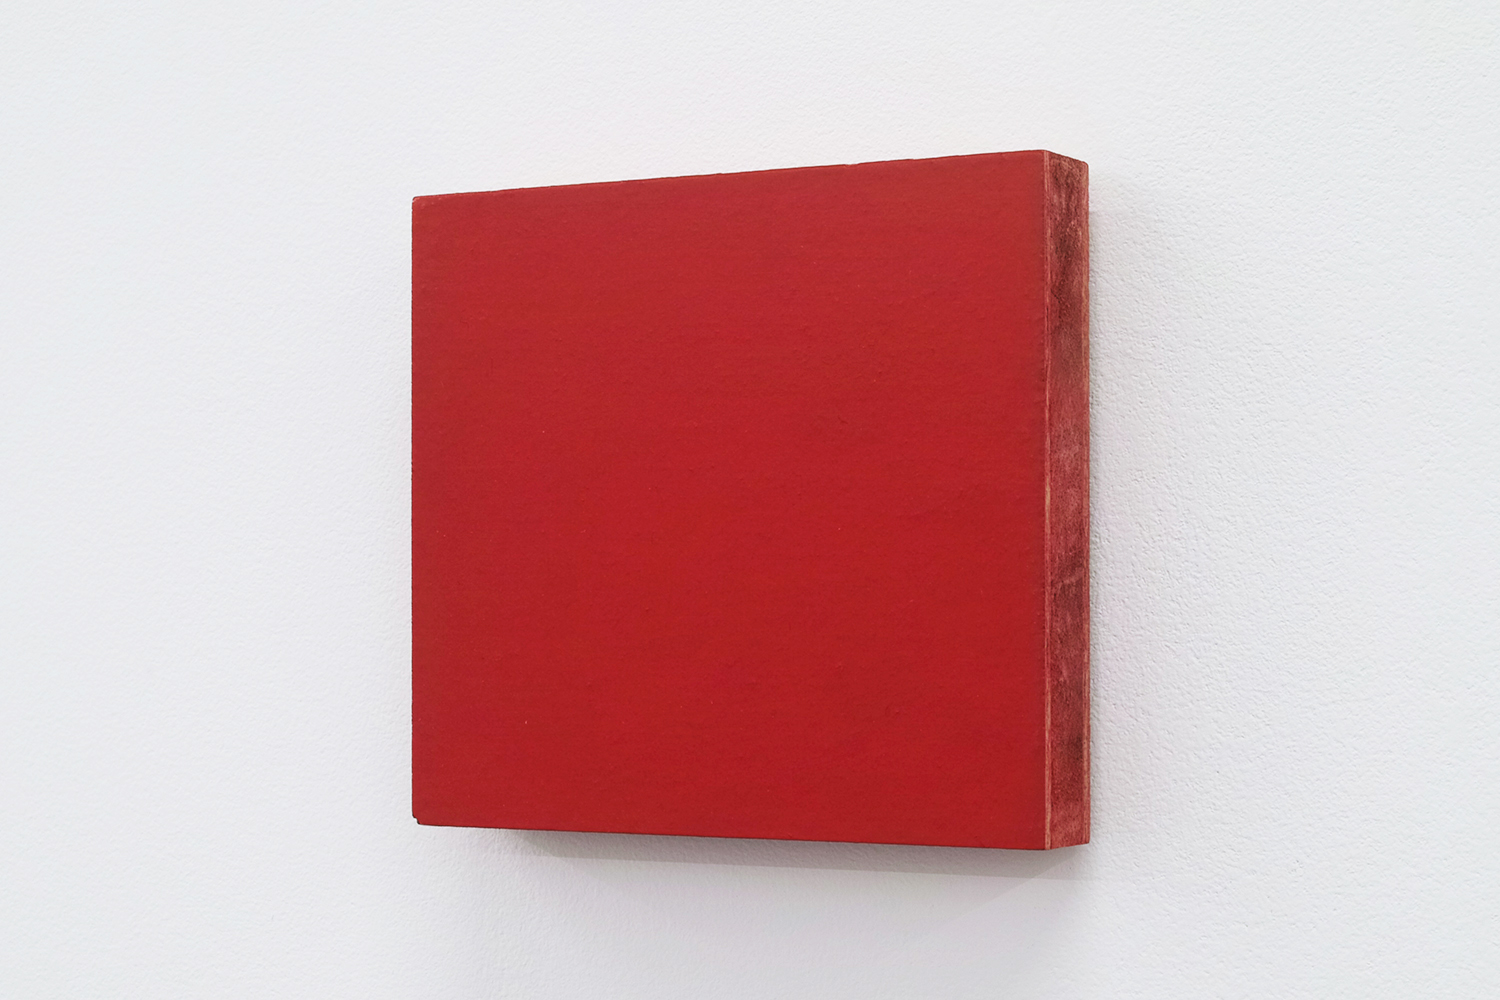 Text No. 445<br>pigment, acrylic on plywood,  92 x 100 x 20 mm,  2004